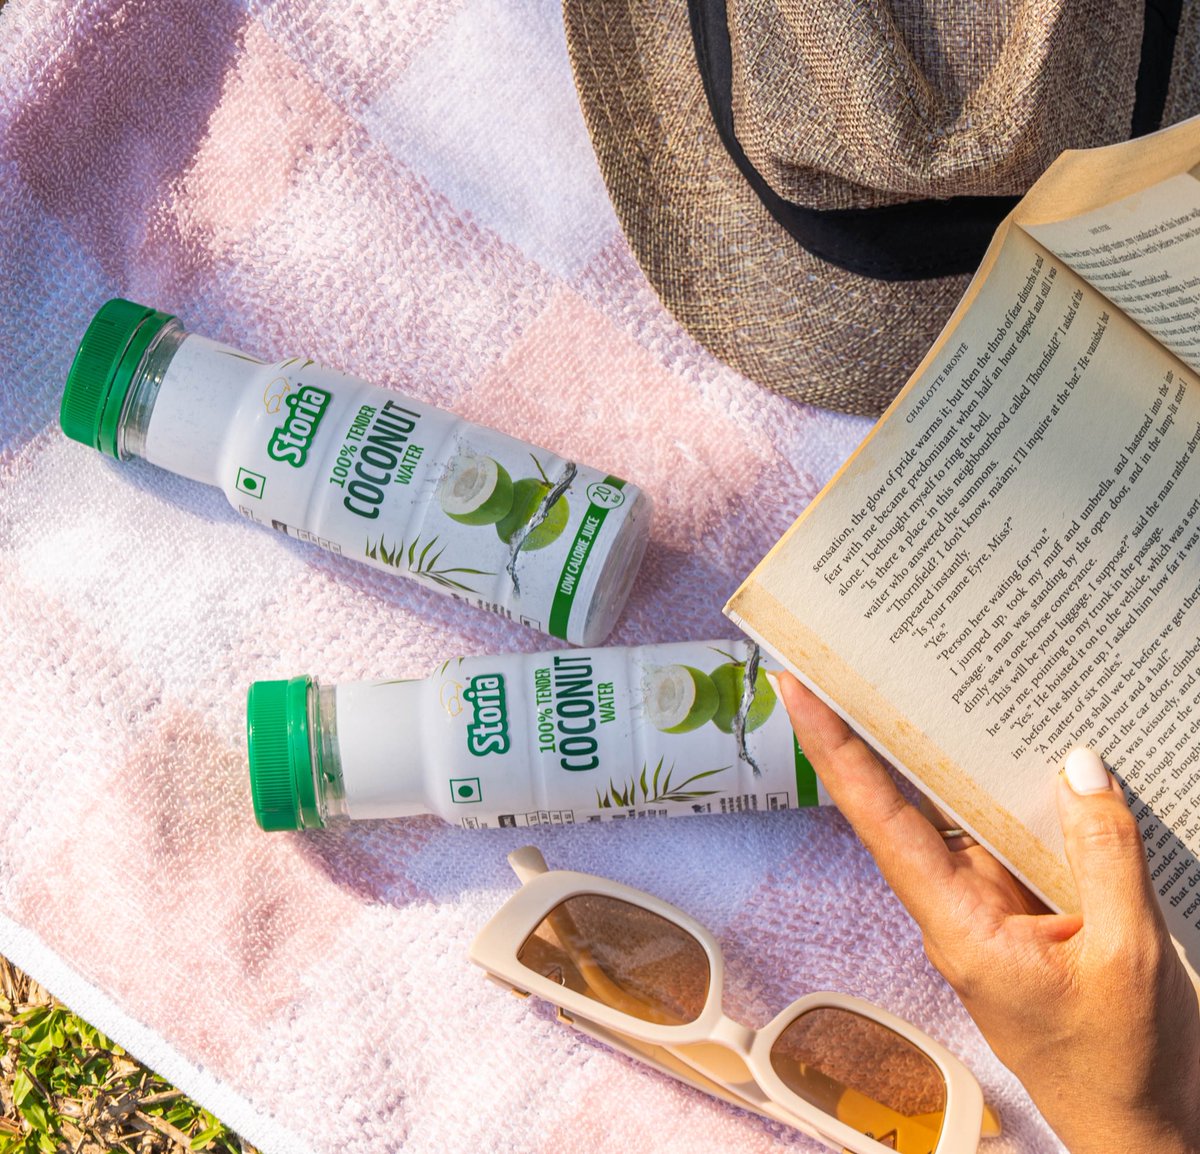 Beat the summer heat with a sip of pure tropical goodness! Storia 100% Coconut water is your go-to drink for staying refreshed and revitalized.

#CoconutWater #Hydration #SummerHydration #TenderCoconutWater #Refreshment
#TropicalDrink #HydrateNaturally #SummerSips #Storia